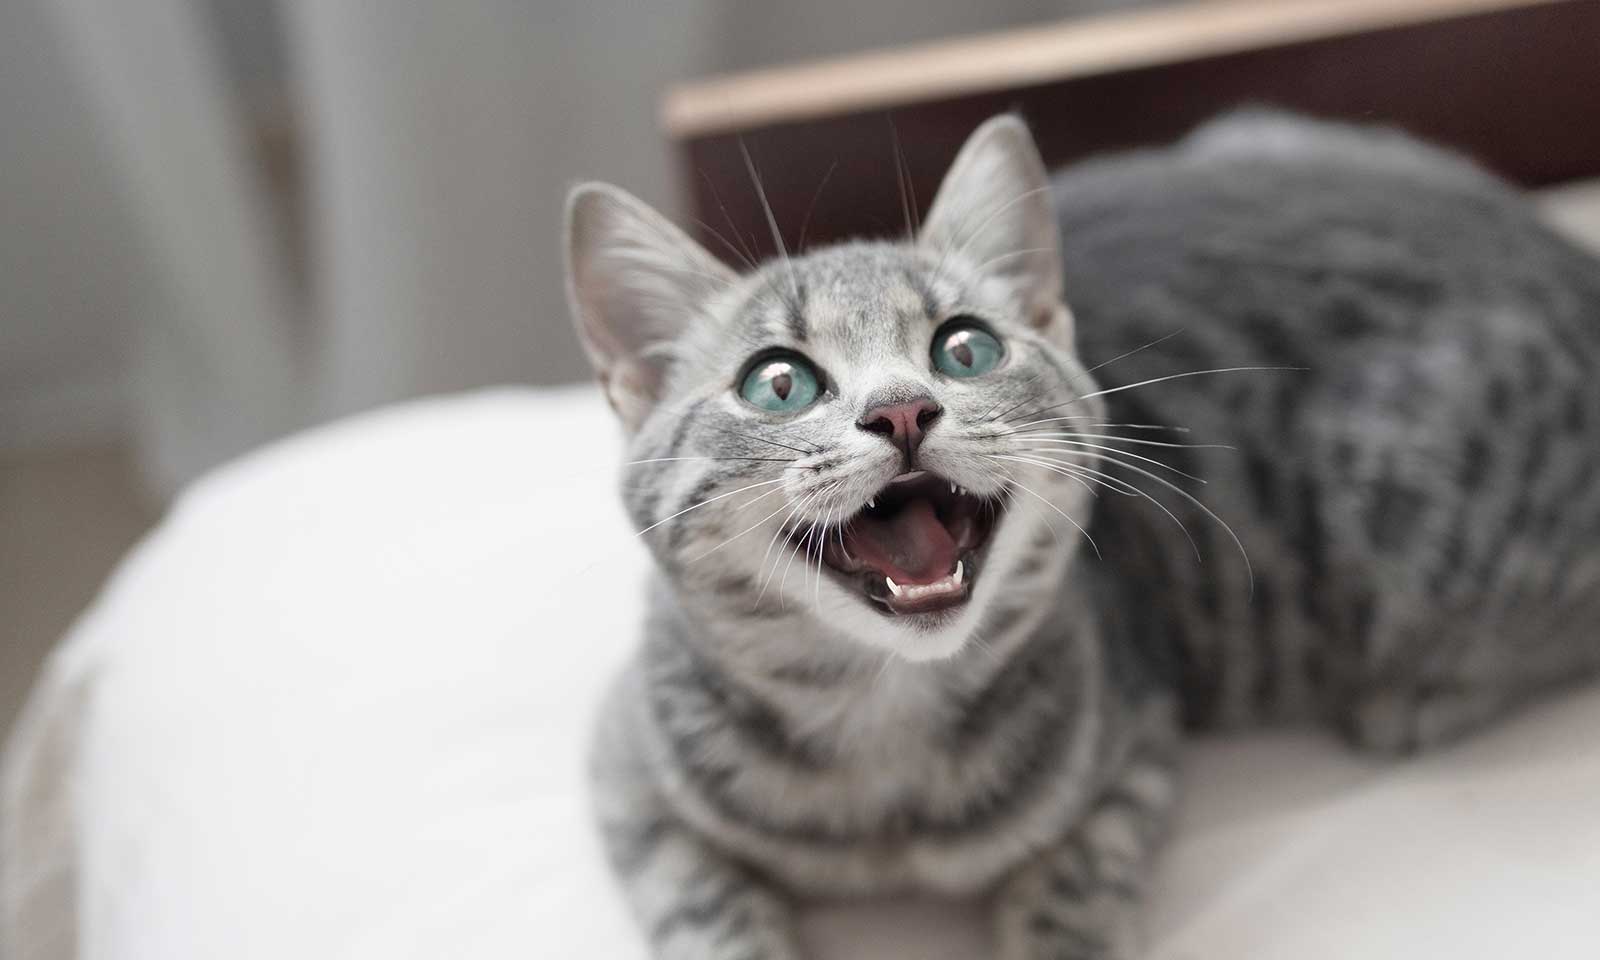 A grey cat meowing